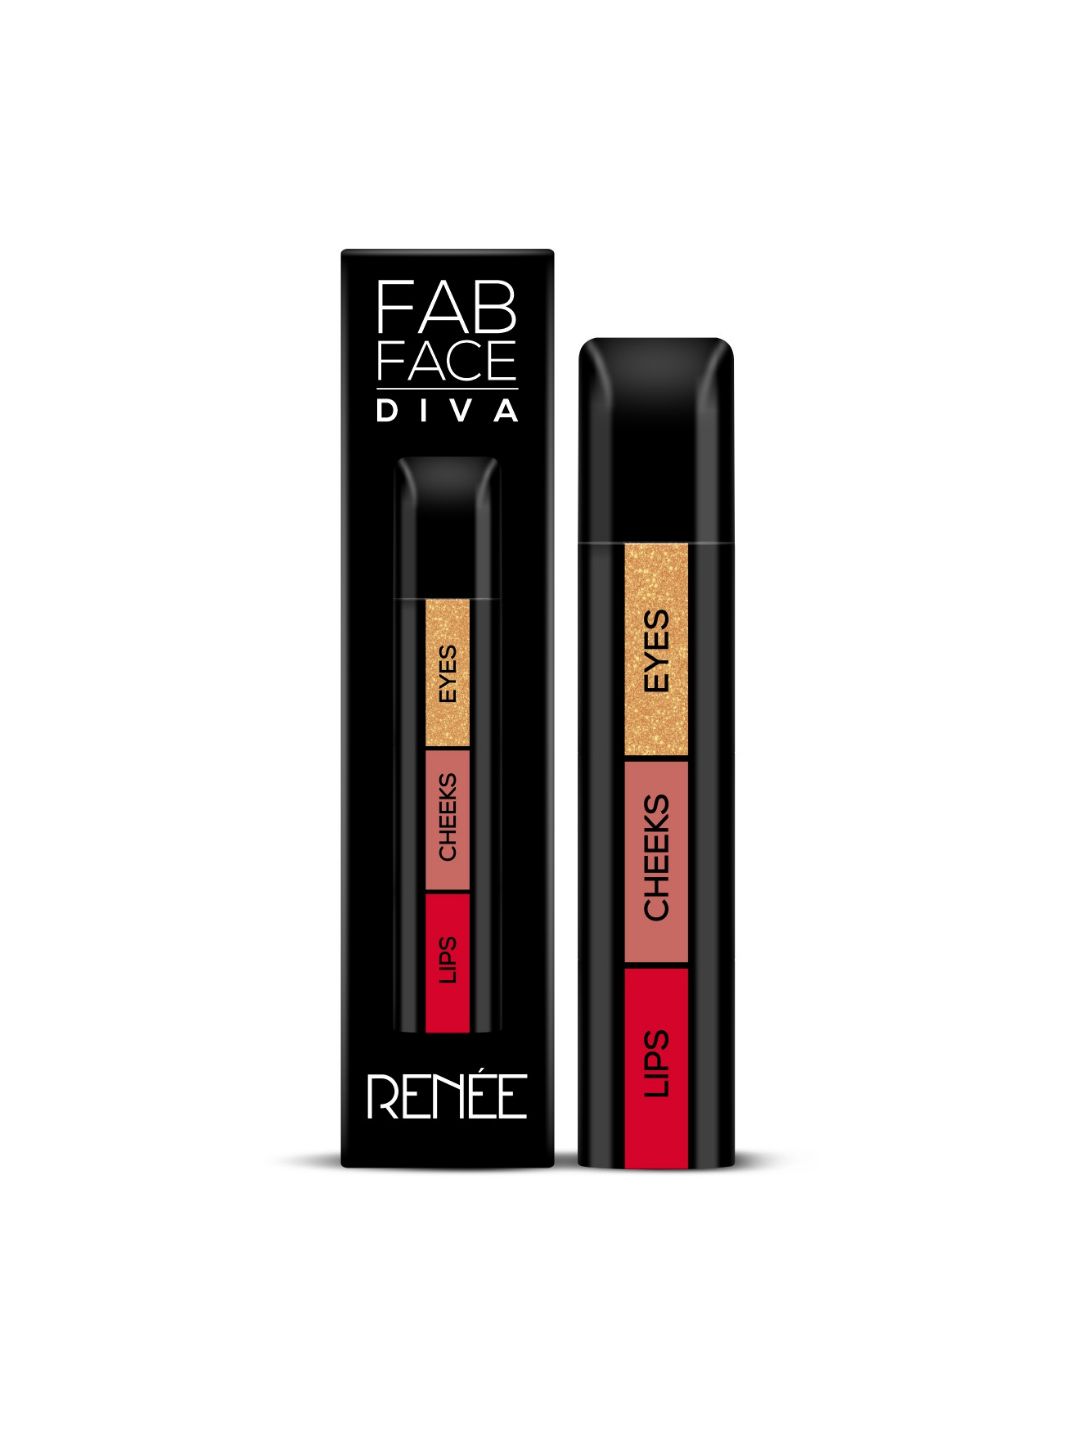 RENEE Fab Face For Lips Cheeks Eyes - Diva Price in India